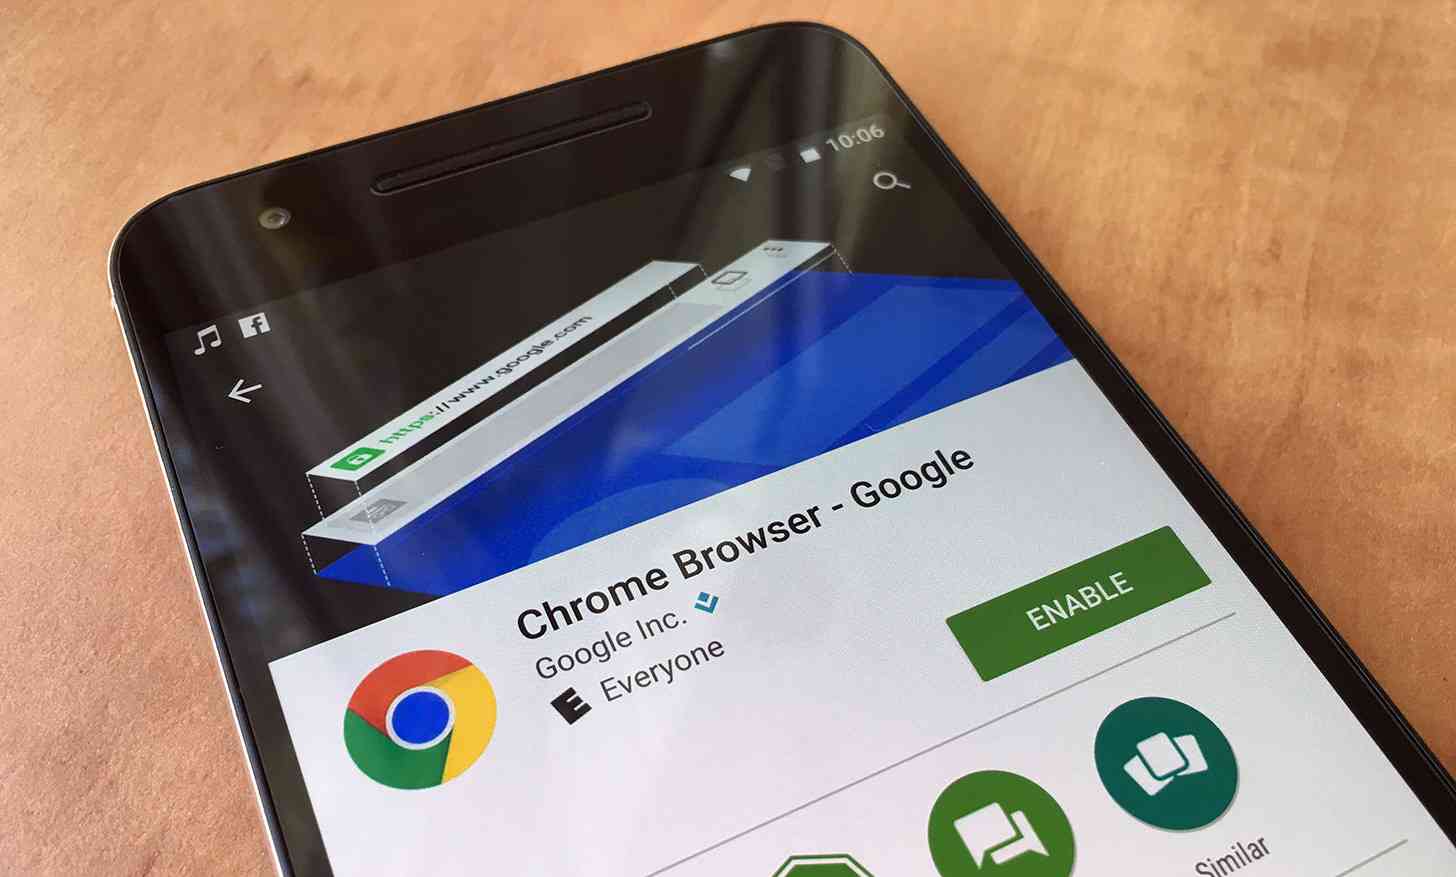 Google Chrome for Android app